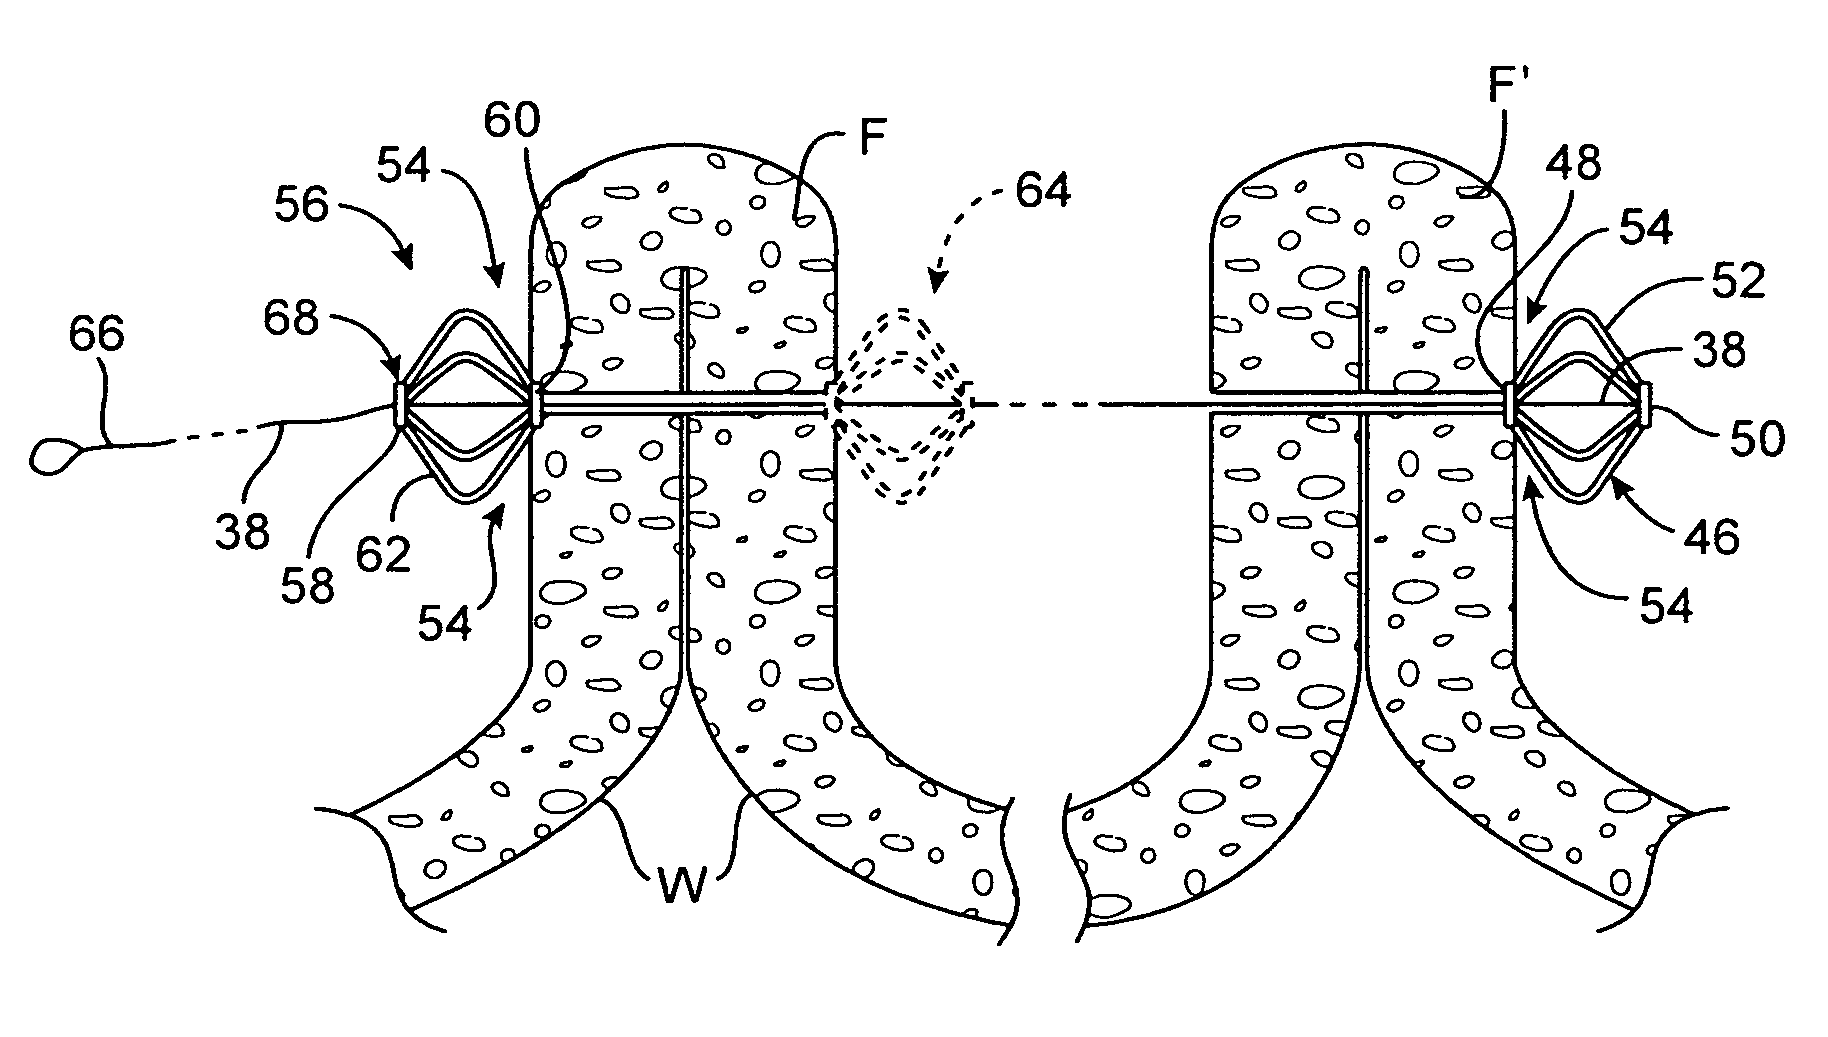 Apparatus and methods for optimizing anchoring force